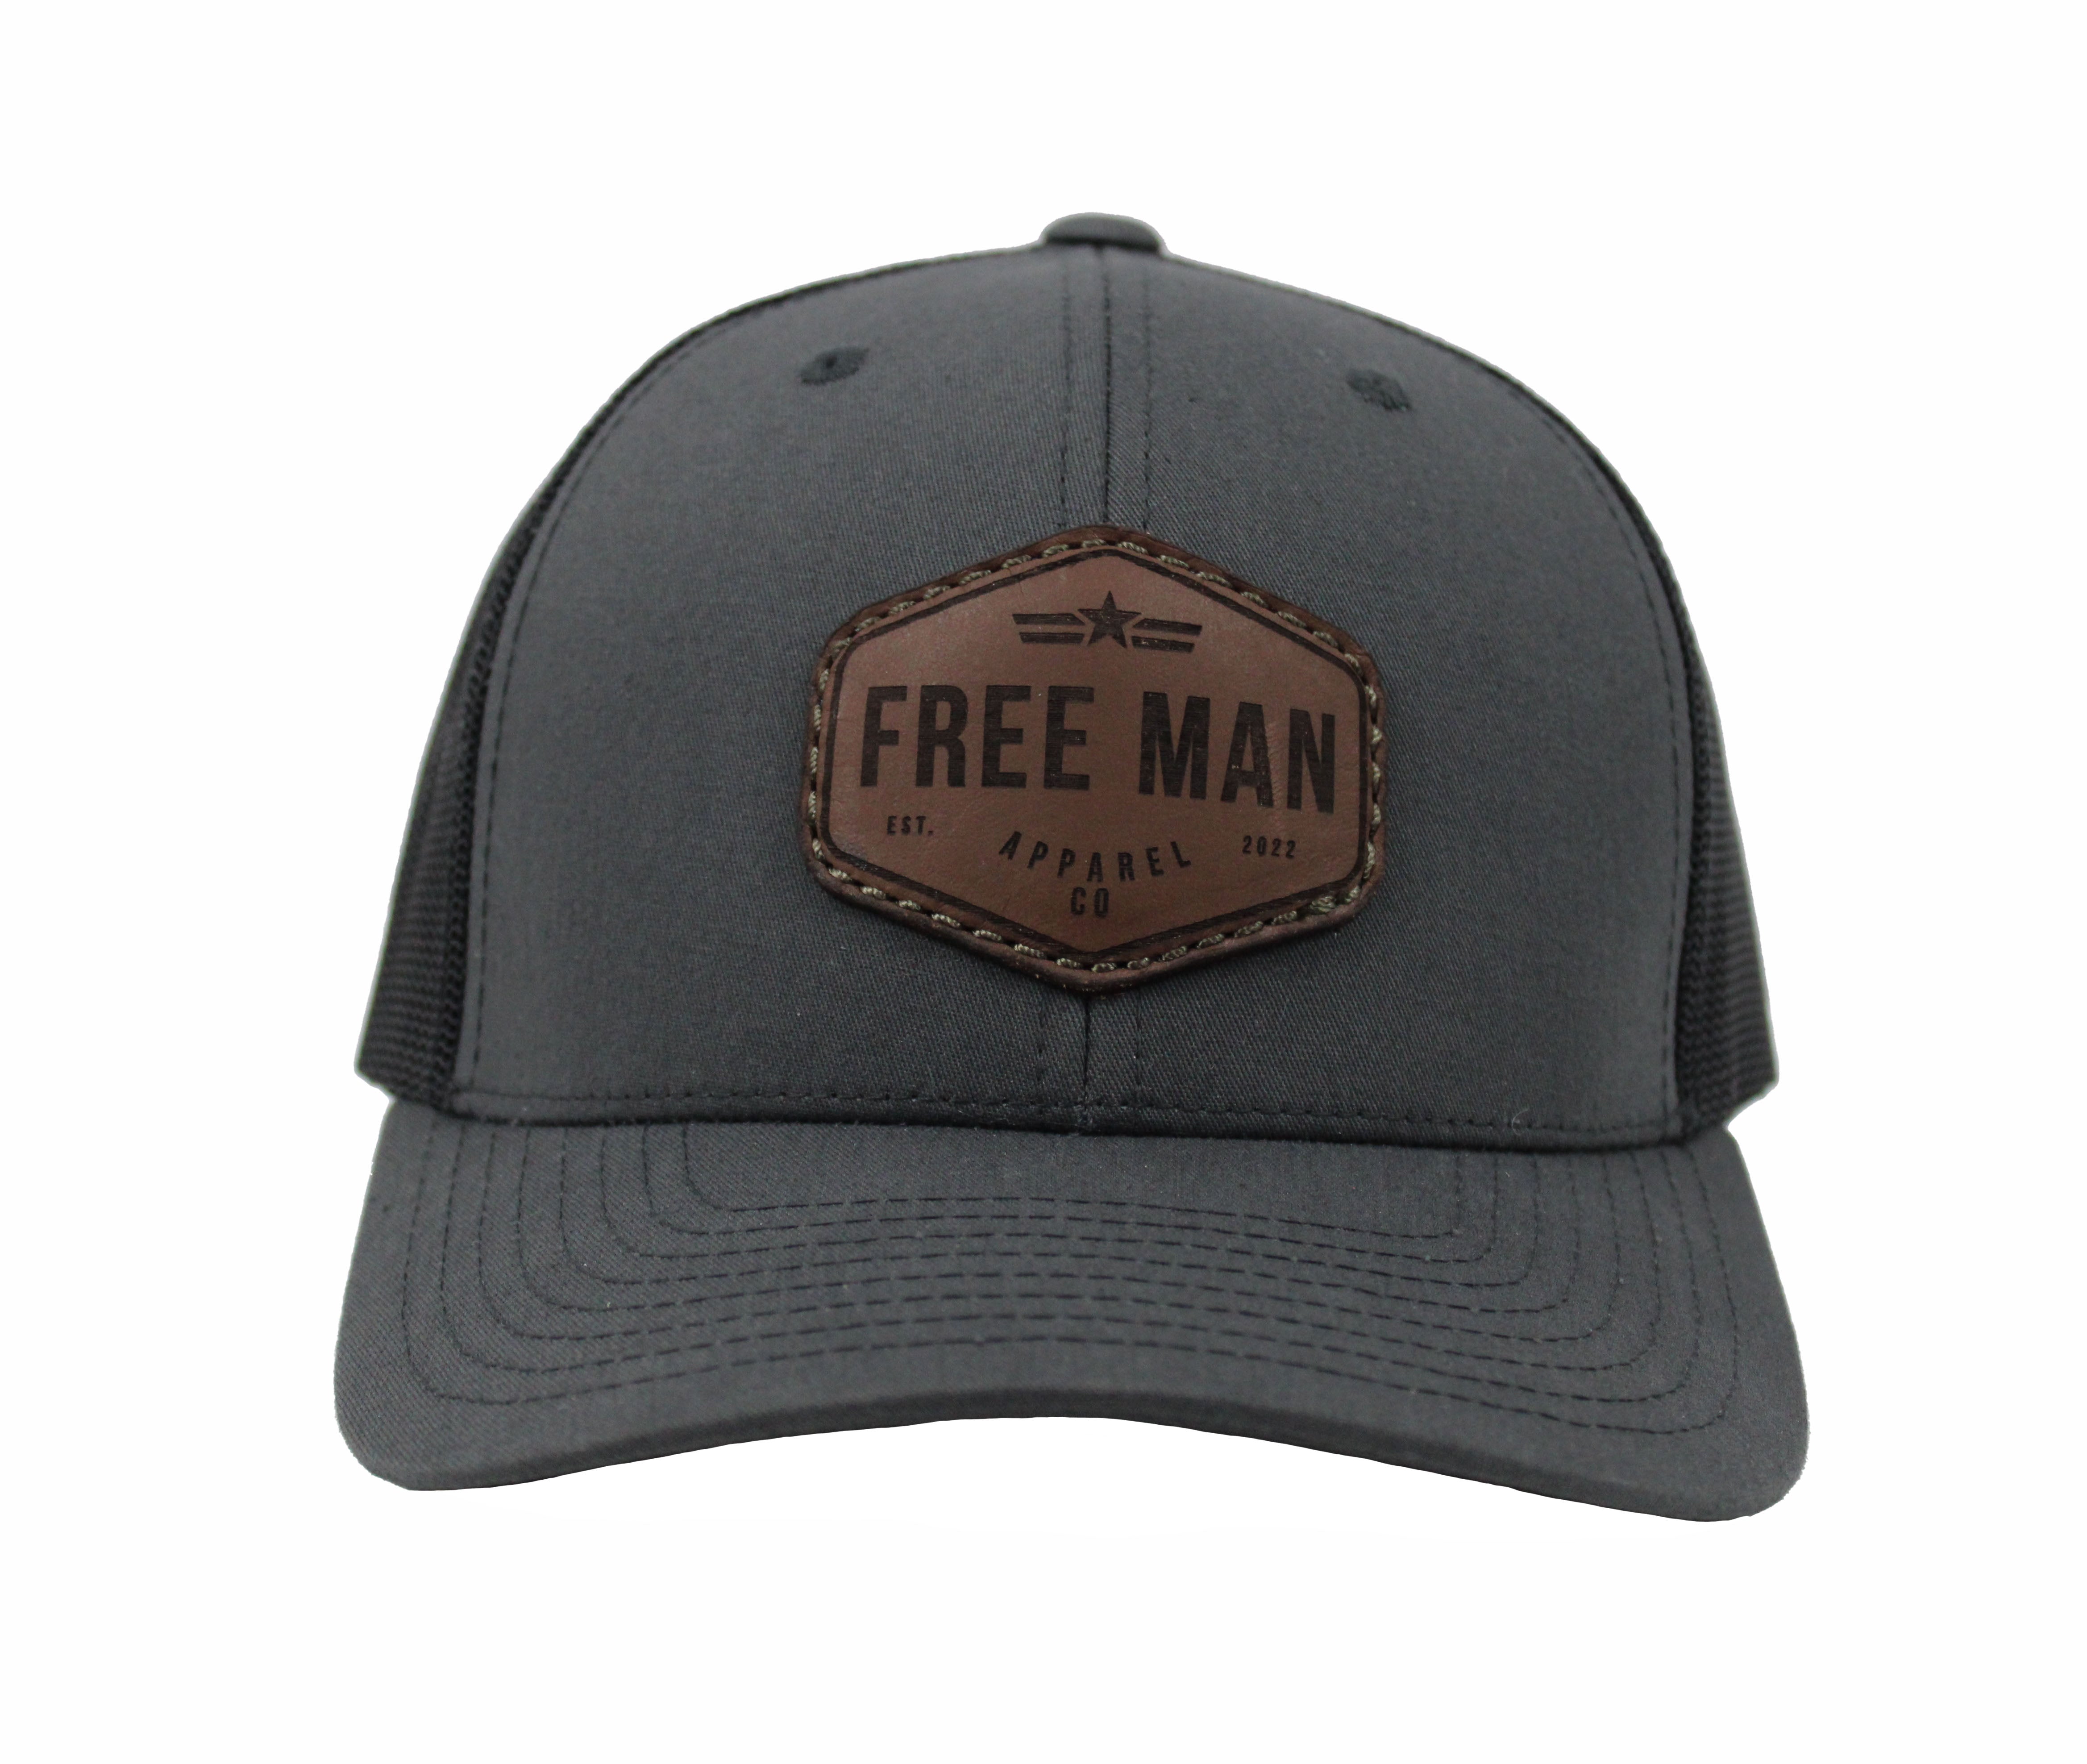 The Founder Retro Charcoal in Apparel – Free Man Trucker